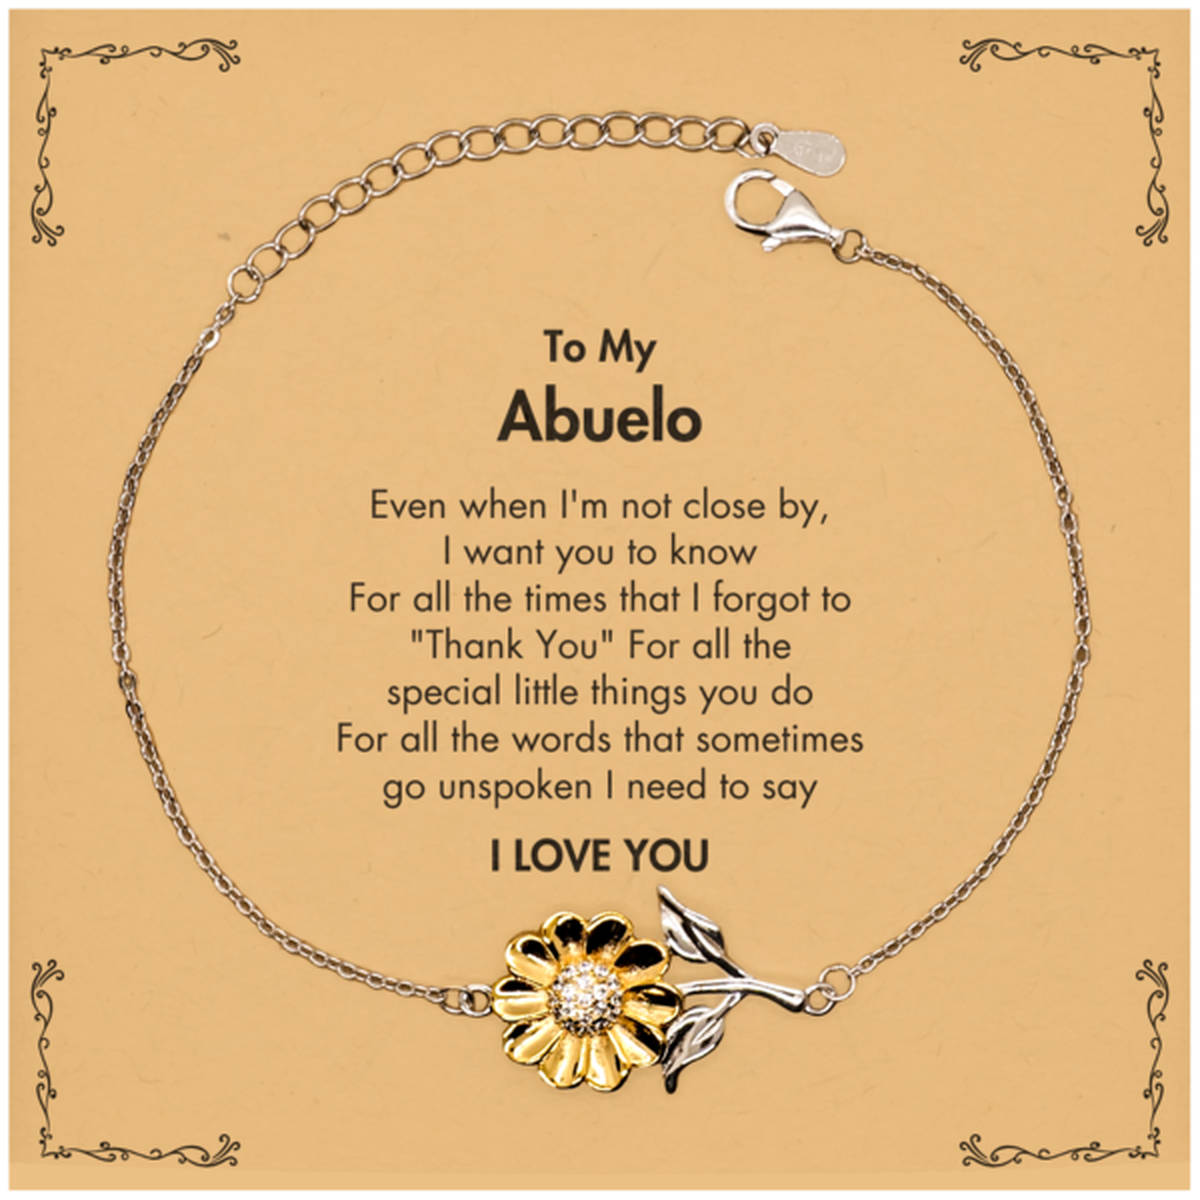 Thank You Gifts for Abuelo, Keepsake Sunflower Bracelet Gifts for Abuelo Birthday Mother's day Father's Day Abuelo For all the words That sometimes go unspoken I need to say I LOVE YOU